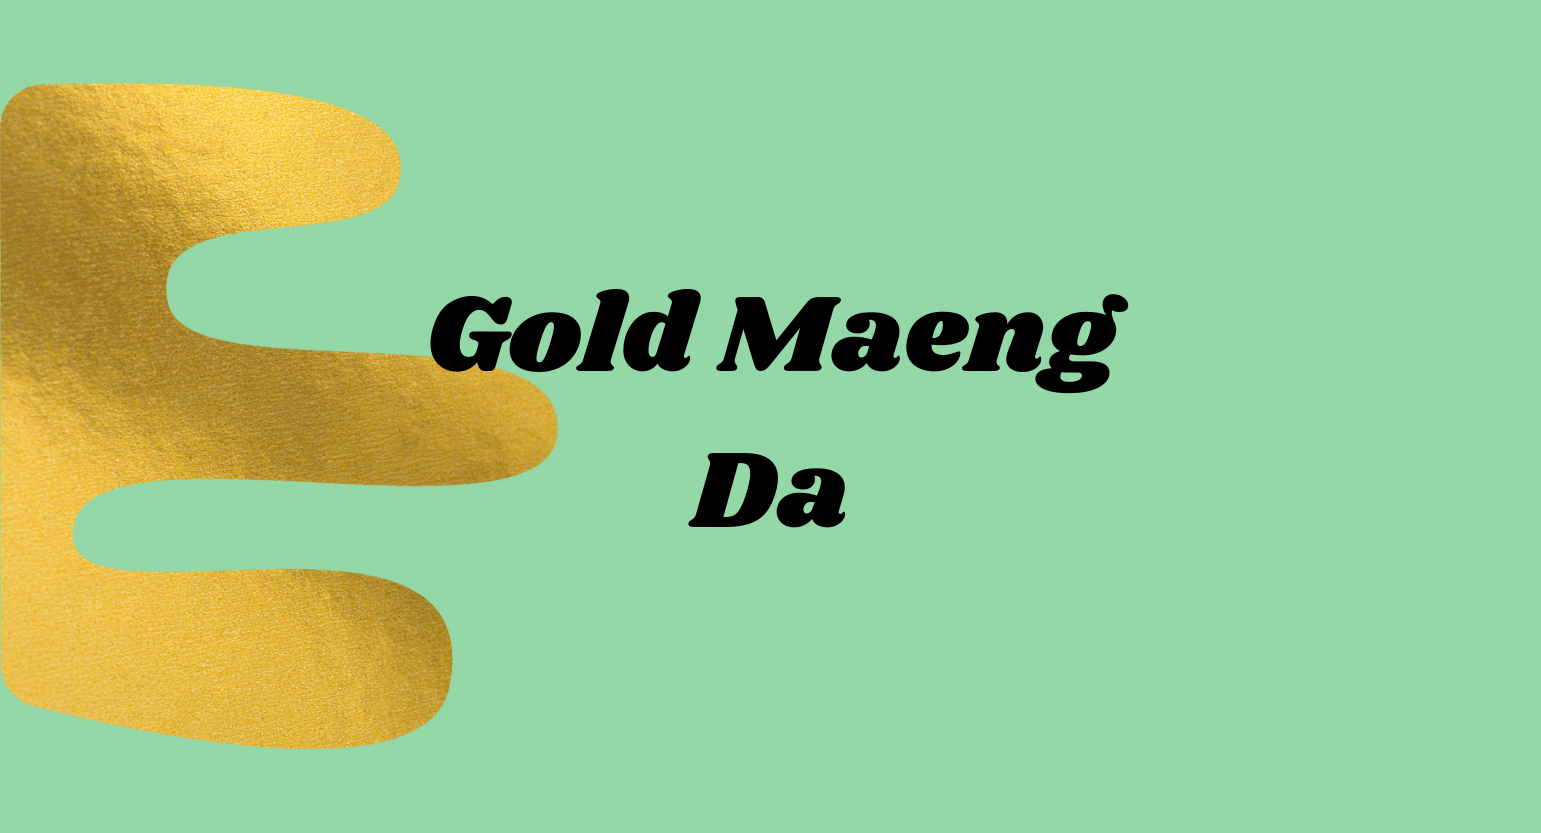 What Is Gold Maeng Da Kratom? Dosage, Effects, Safety & More